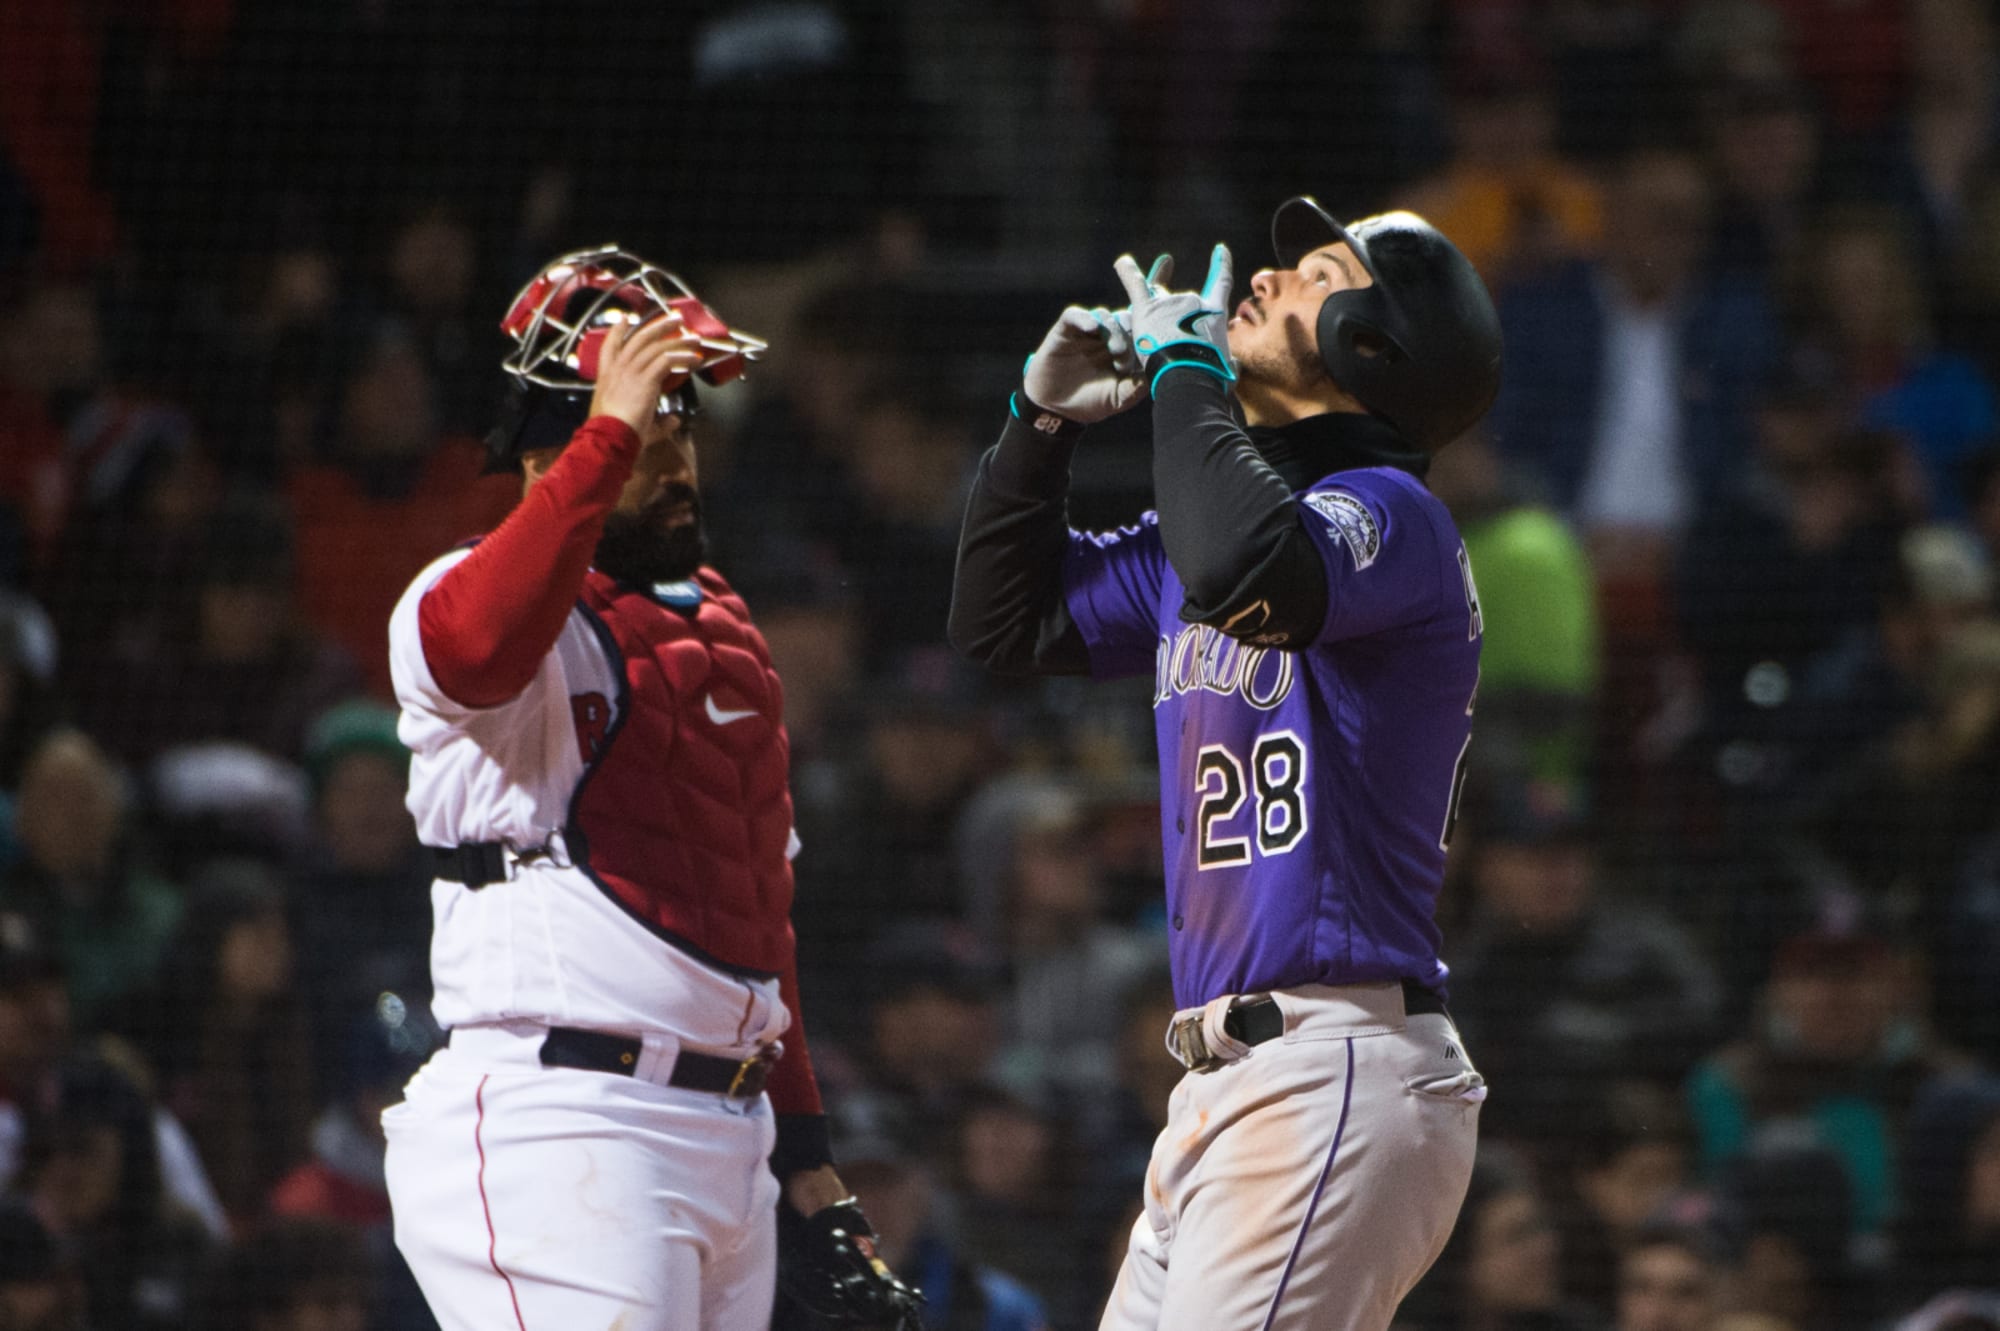 Colorado Rockies vs. Boston Red Sox Live updates from Coors Field